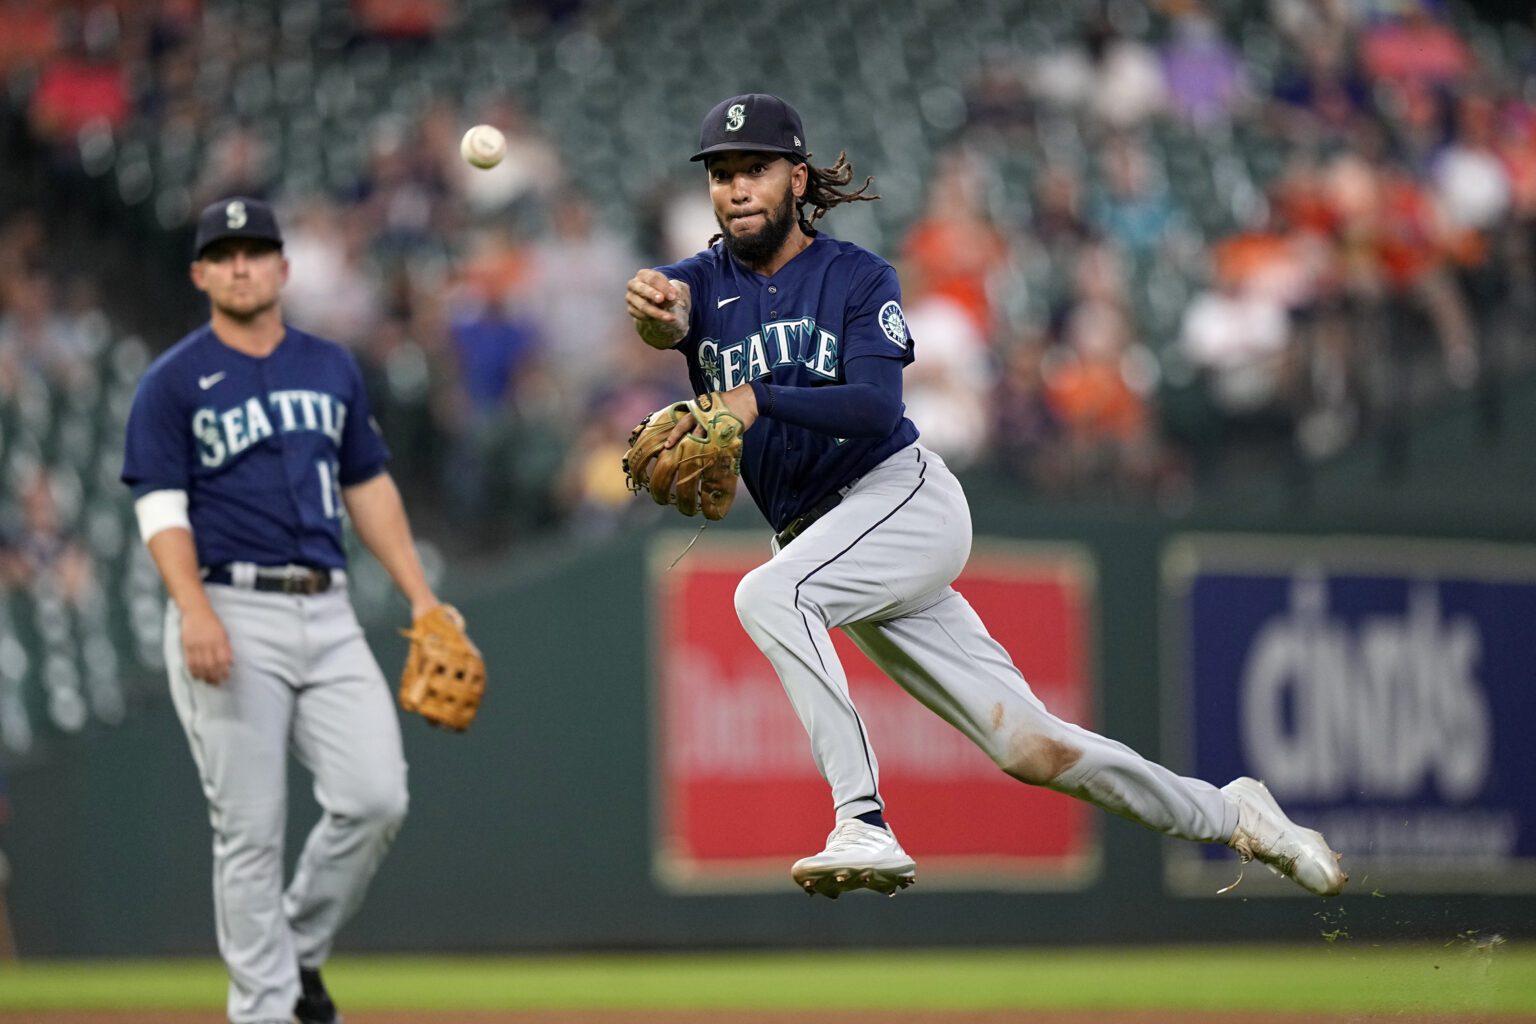 Seattle Mariners shortstop J.P. Crawford throws to first for the out after fielding a ground ball by Houston Astros' Kyle Tucker during the eighth inning of a baseball game